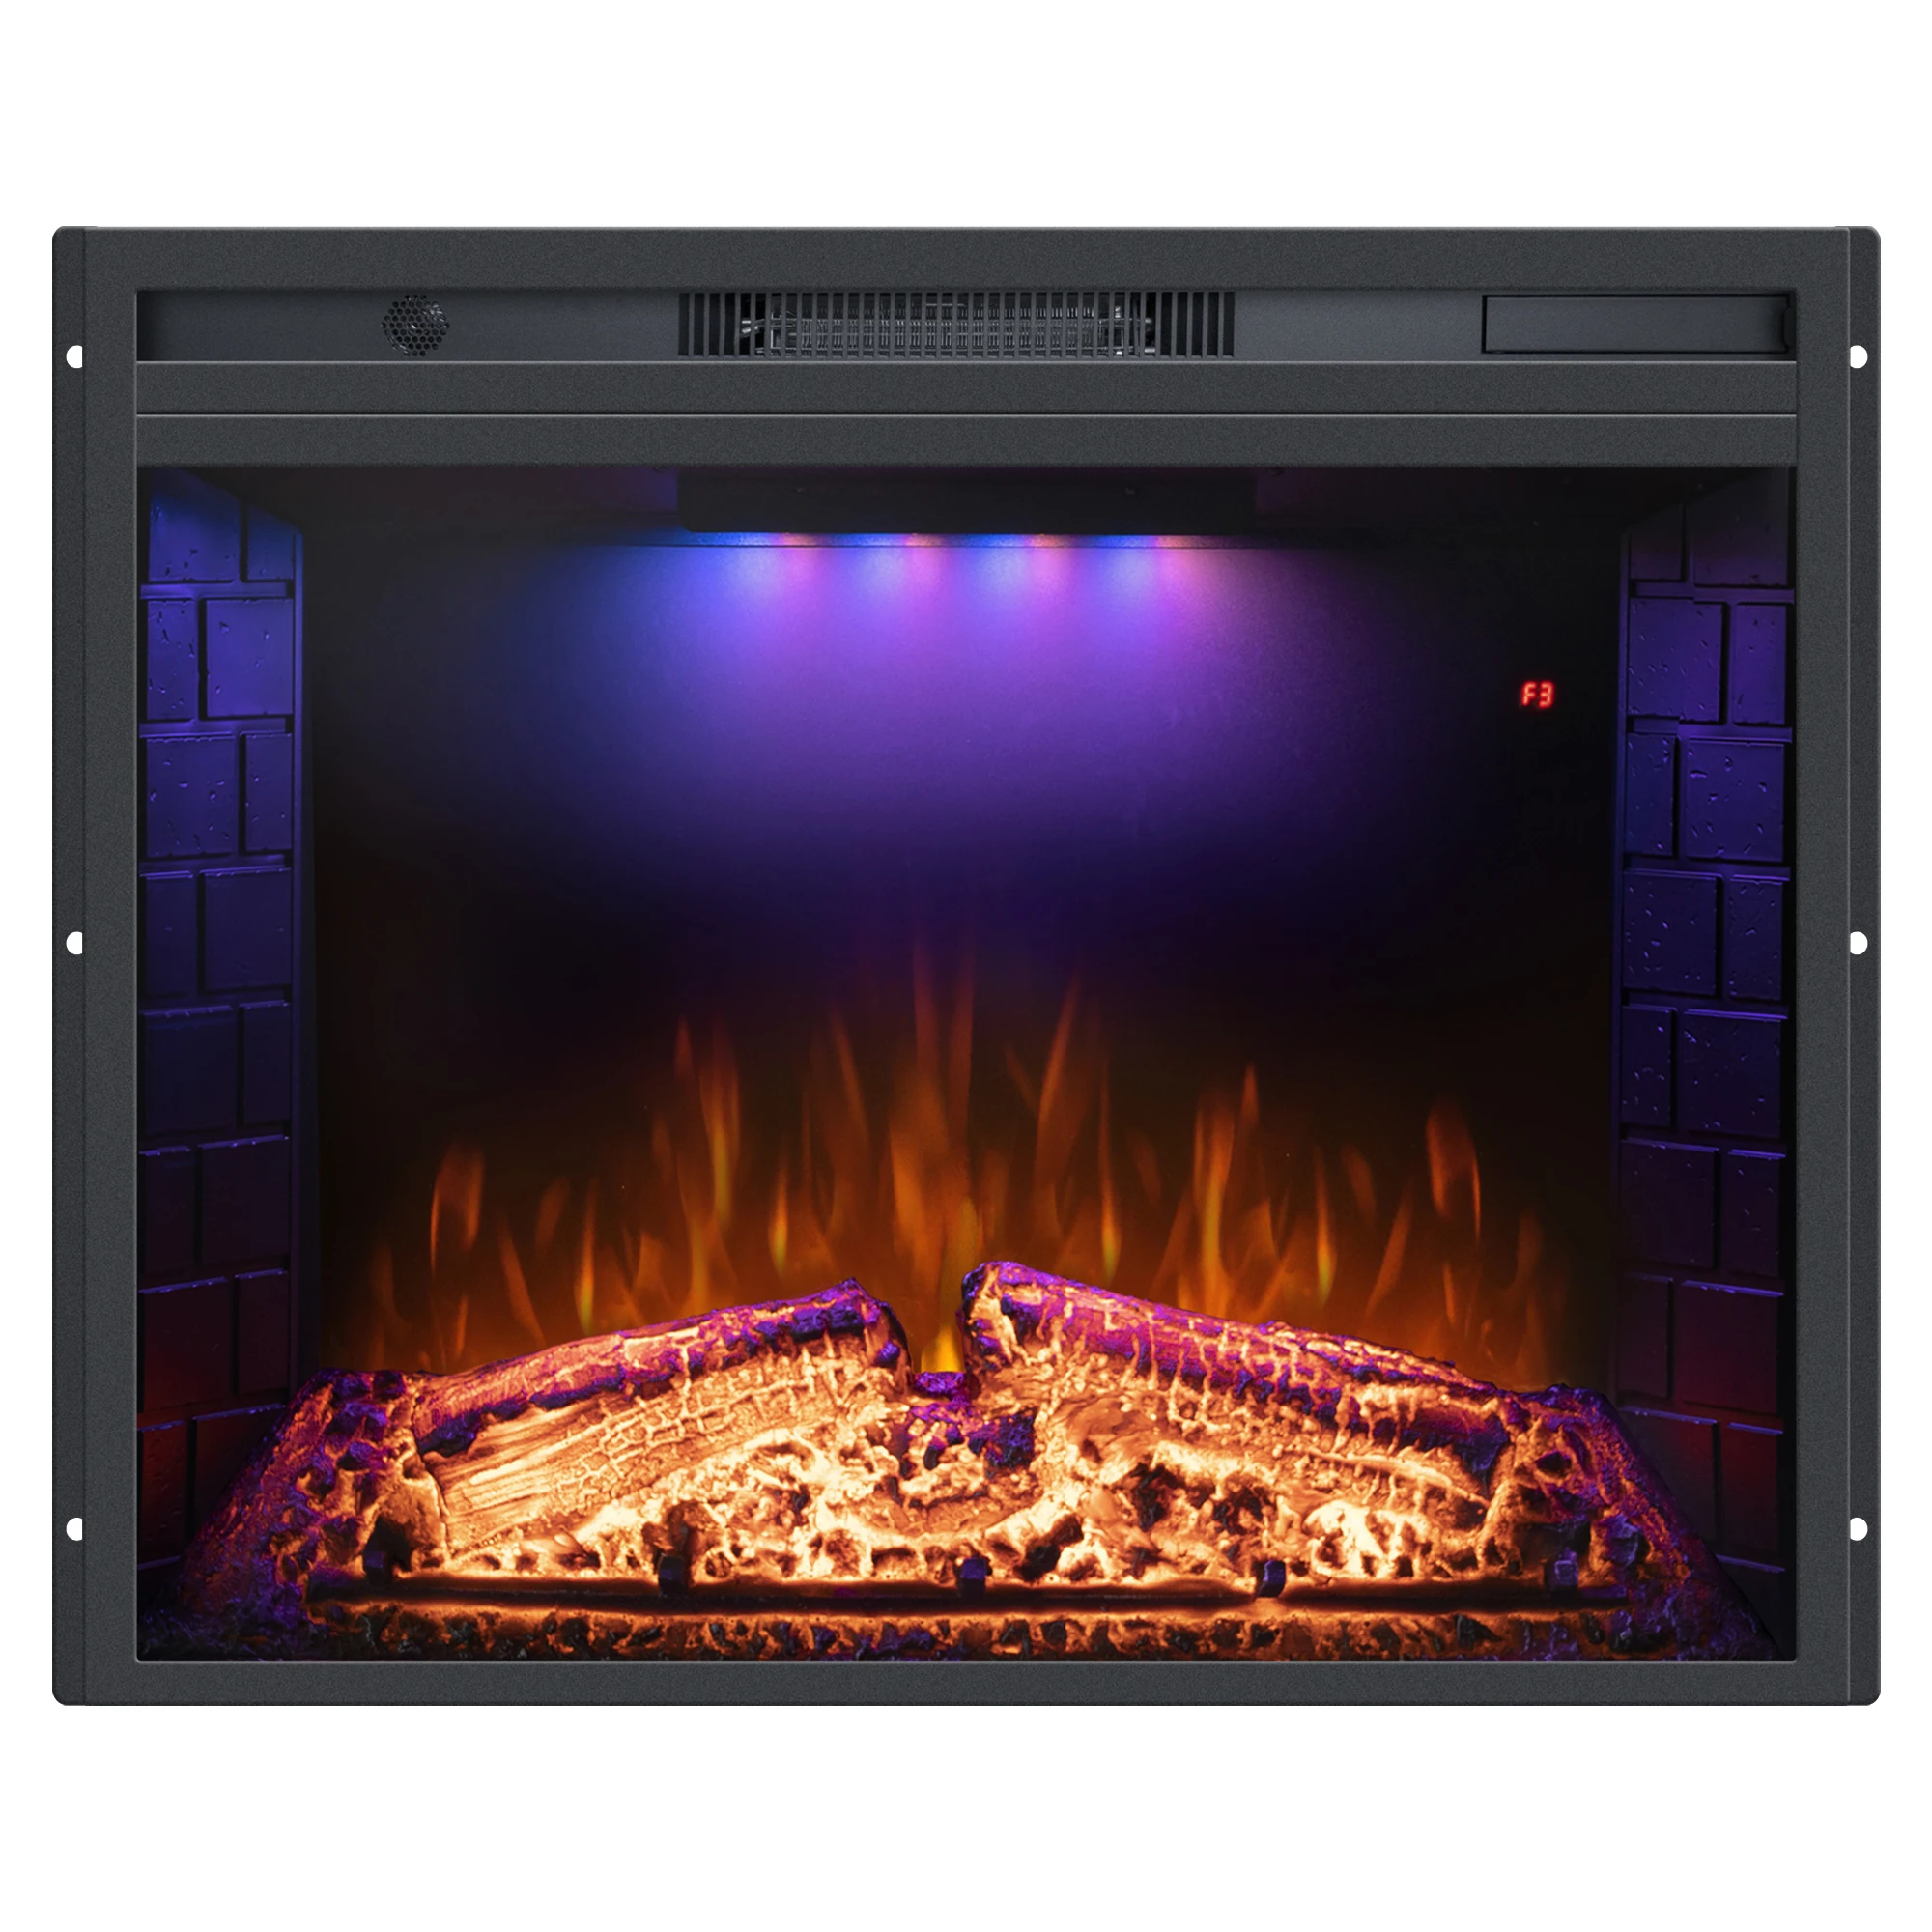 Luxstar Factory Electrical fireplace Insert Colorful Flames Electric Fireplace Indoor Warm Decoration Fireplace